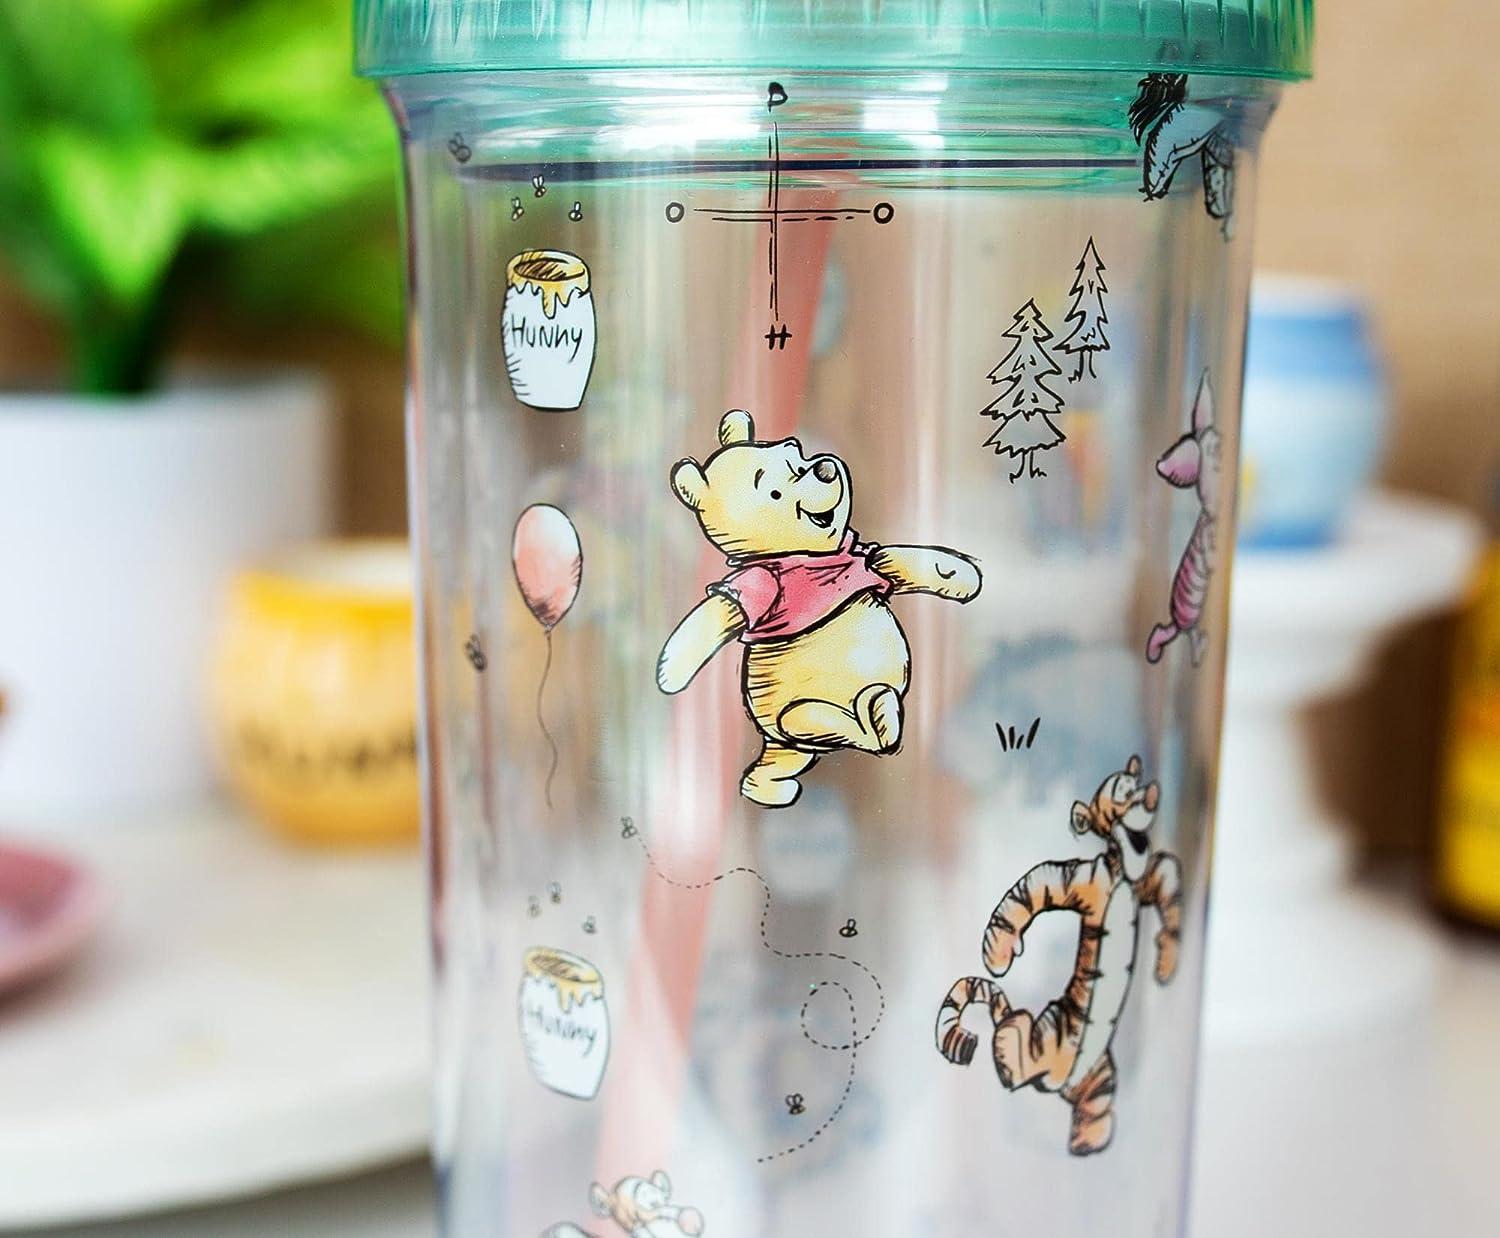 Winnie the pooh and friends 20 Oz Drinking Glasses with Bamboo Lids and  Glass Straw 1 available #fyp #fyi #supportsmallbusinesses…